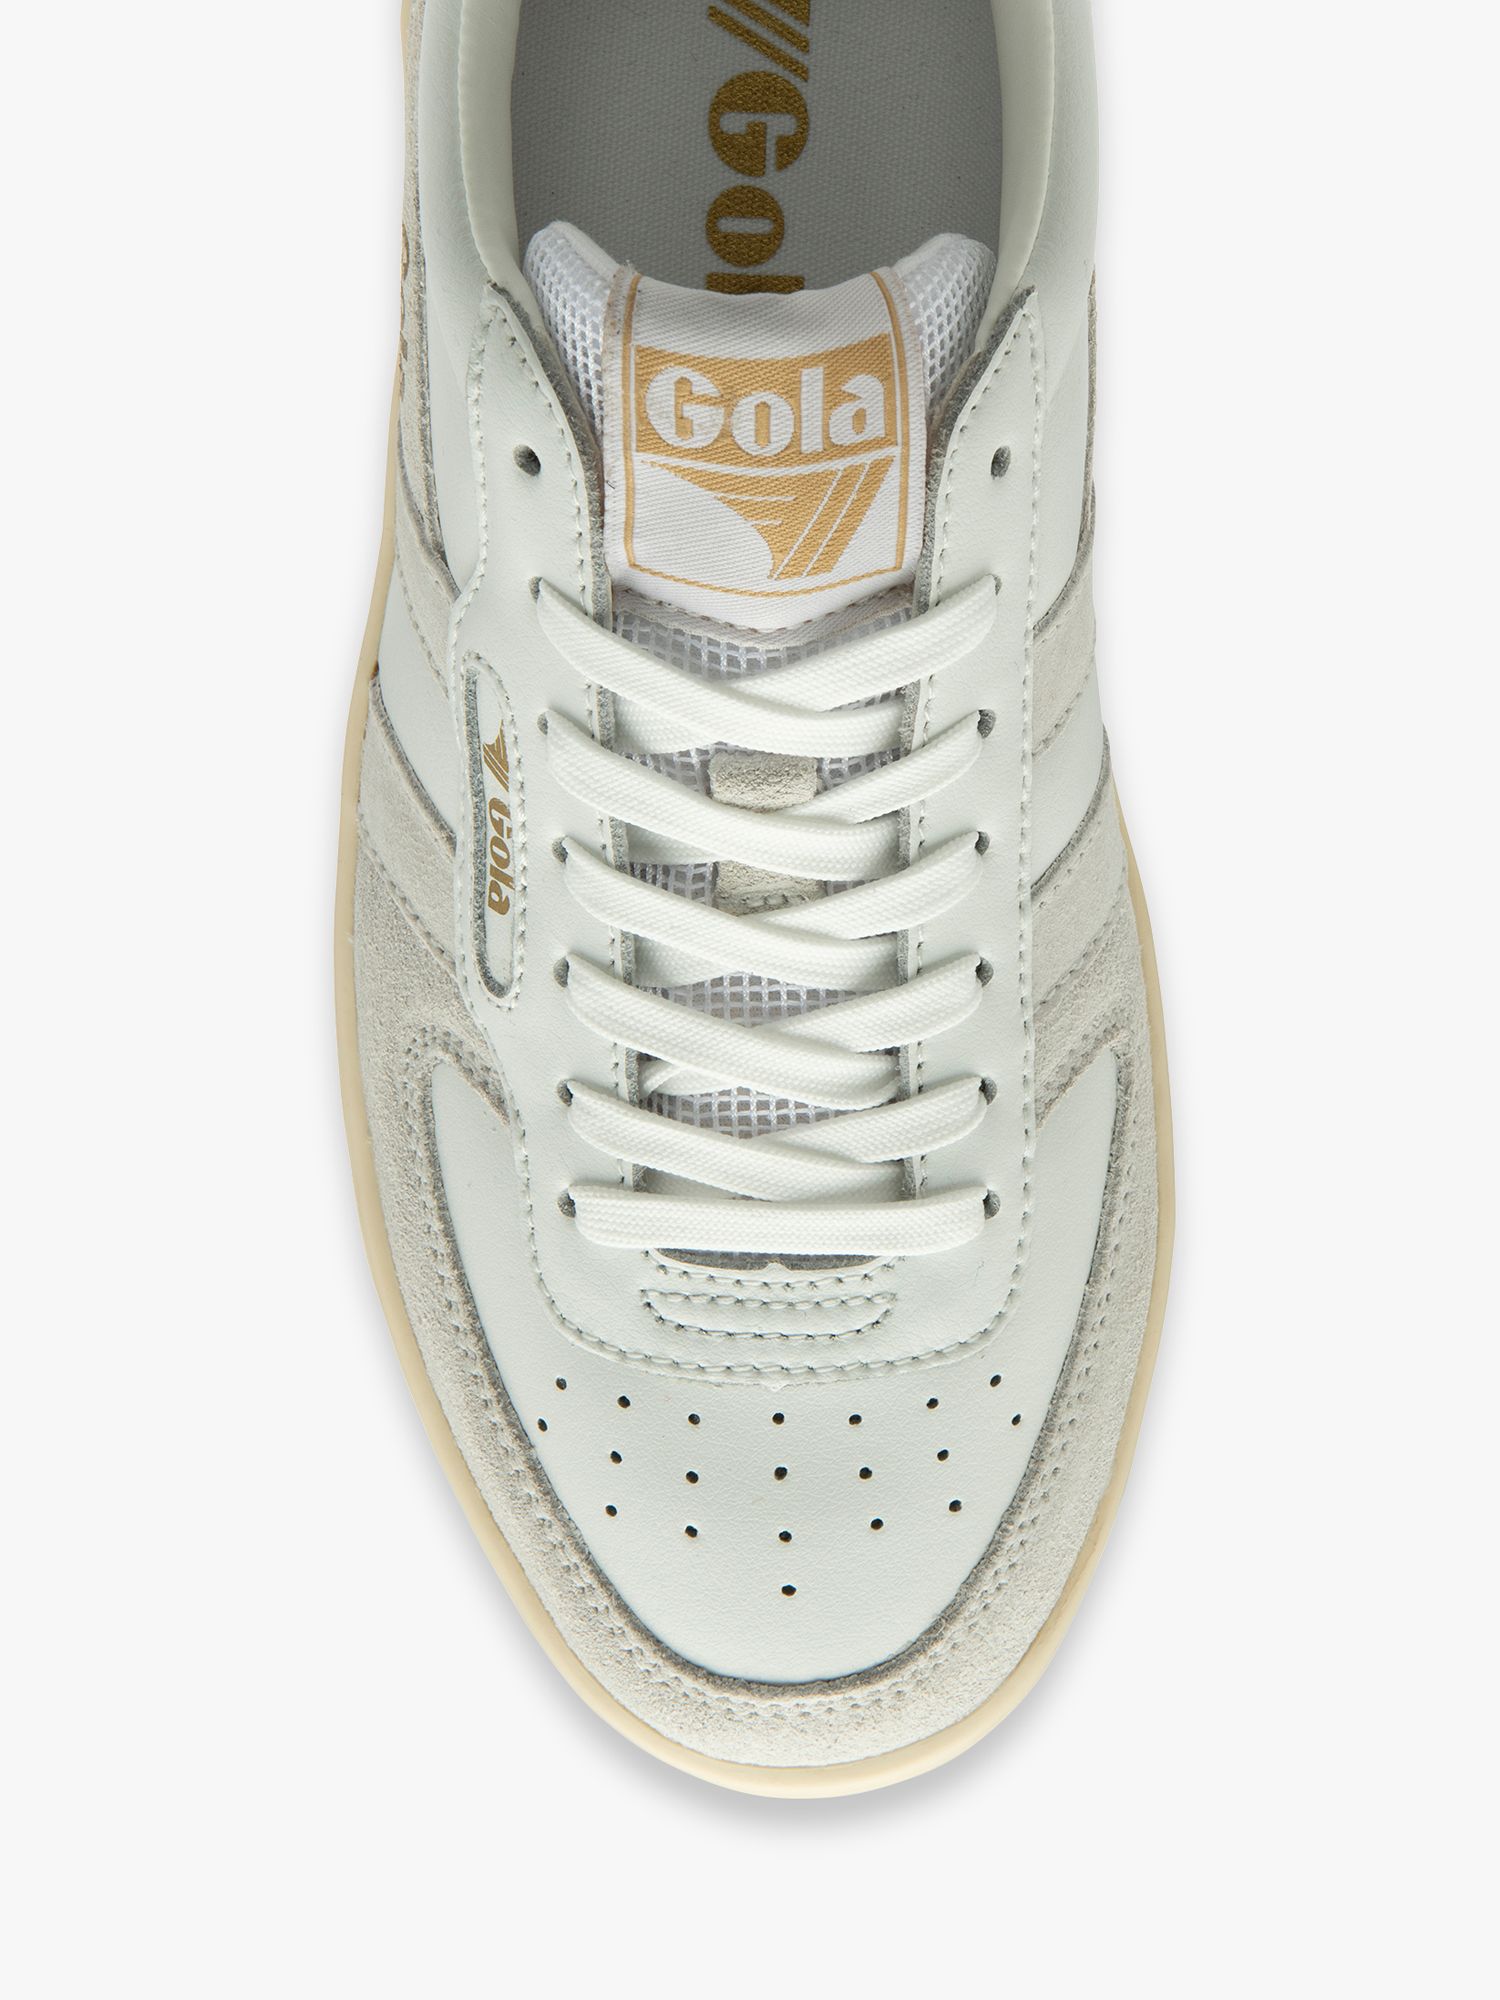 Buy Gola Classics Hawk Leather Lace Up Trainers, White/Gold Online at johnlewis.com